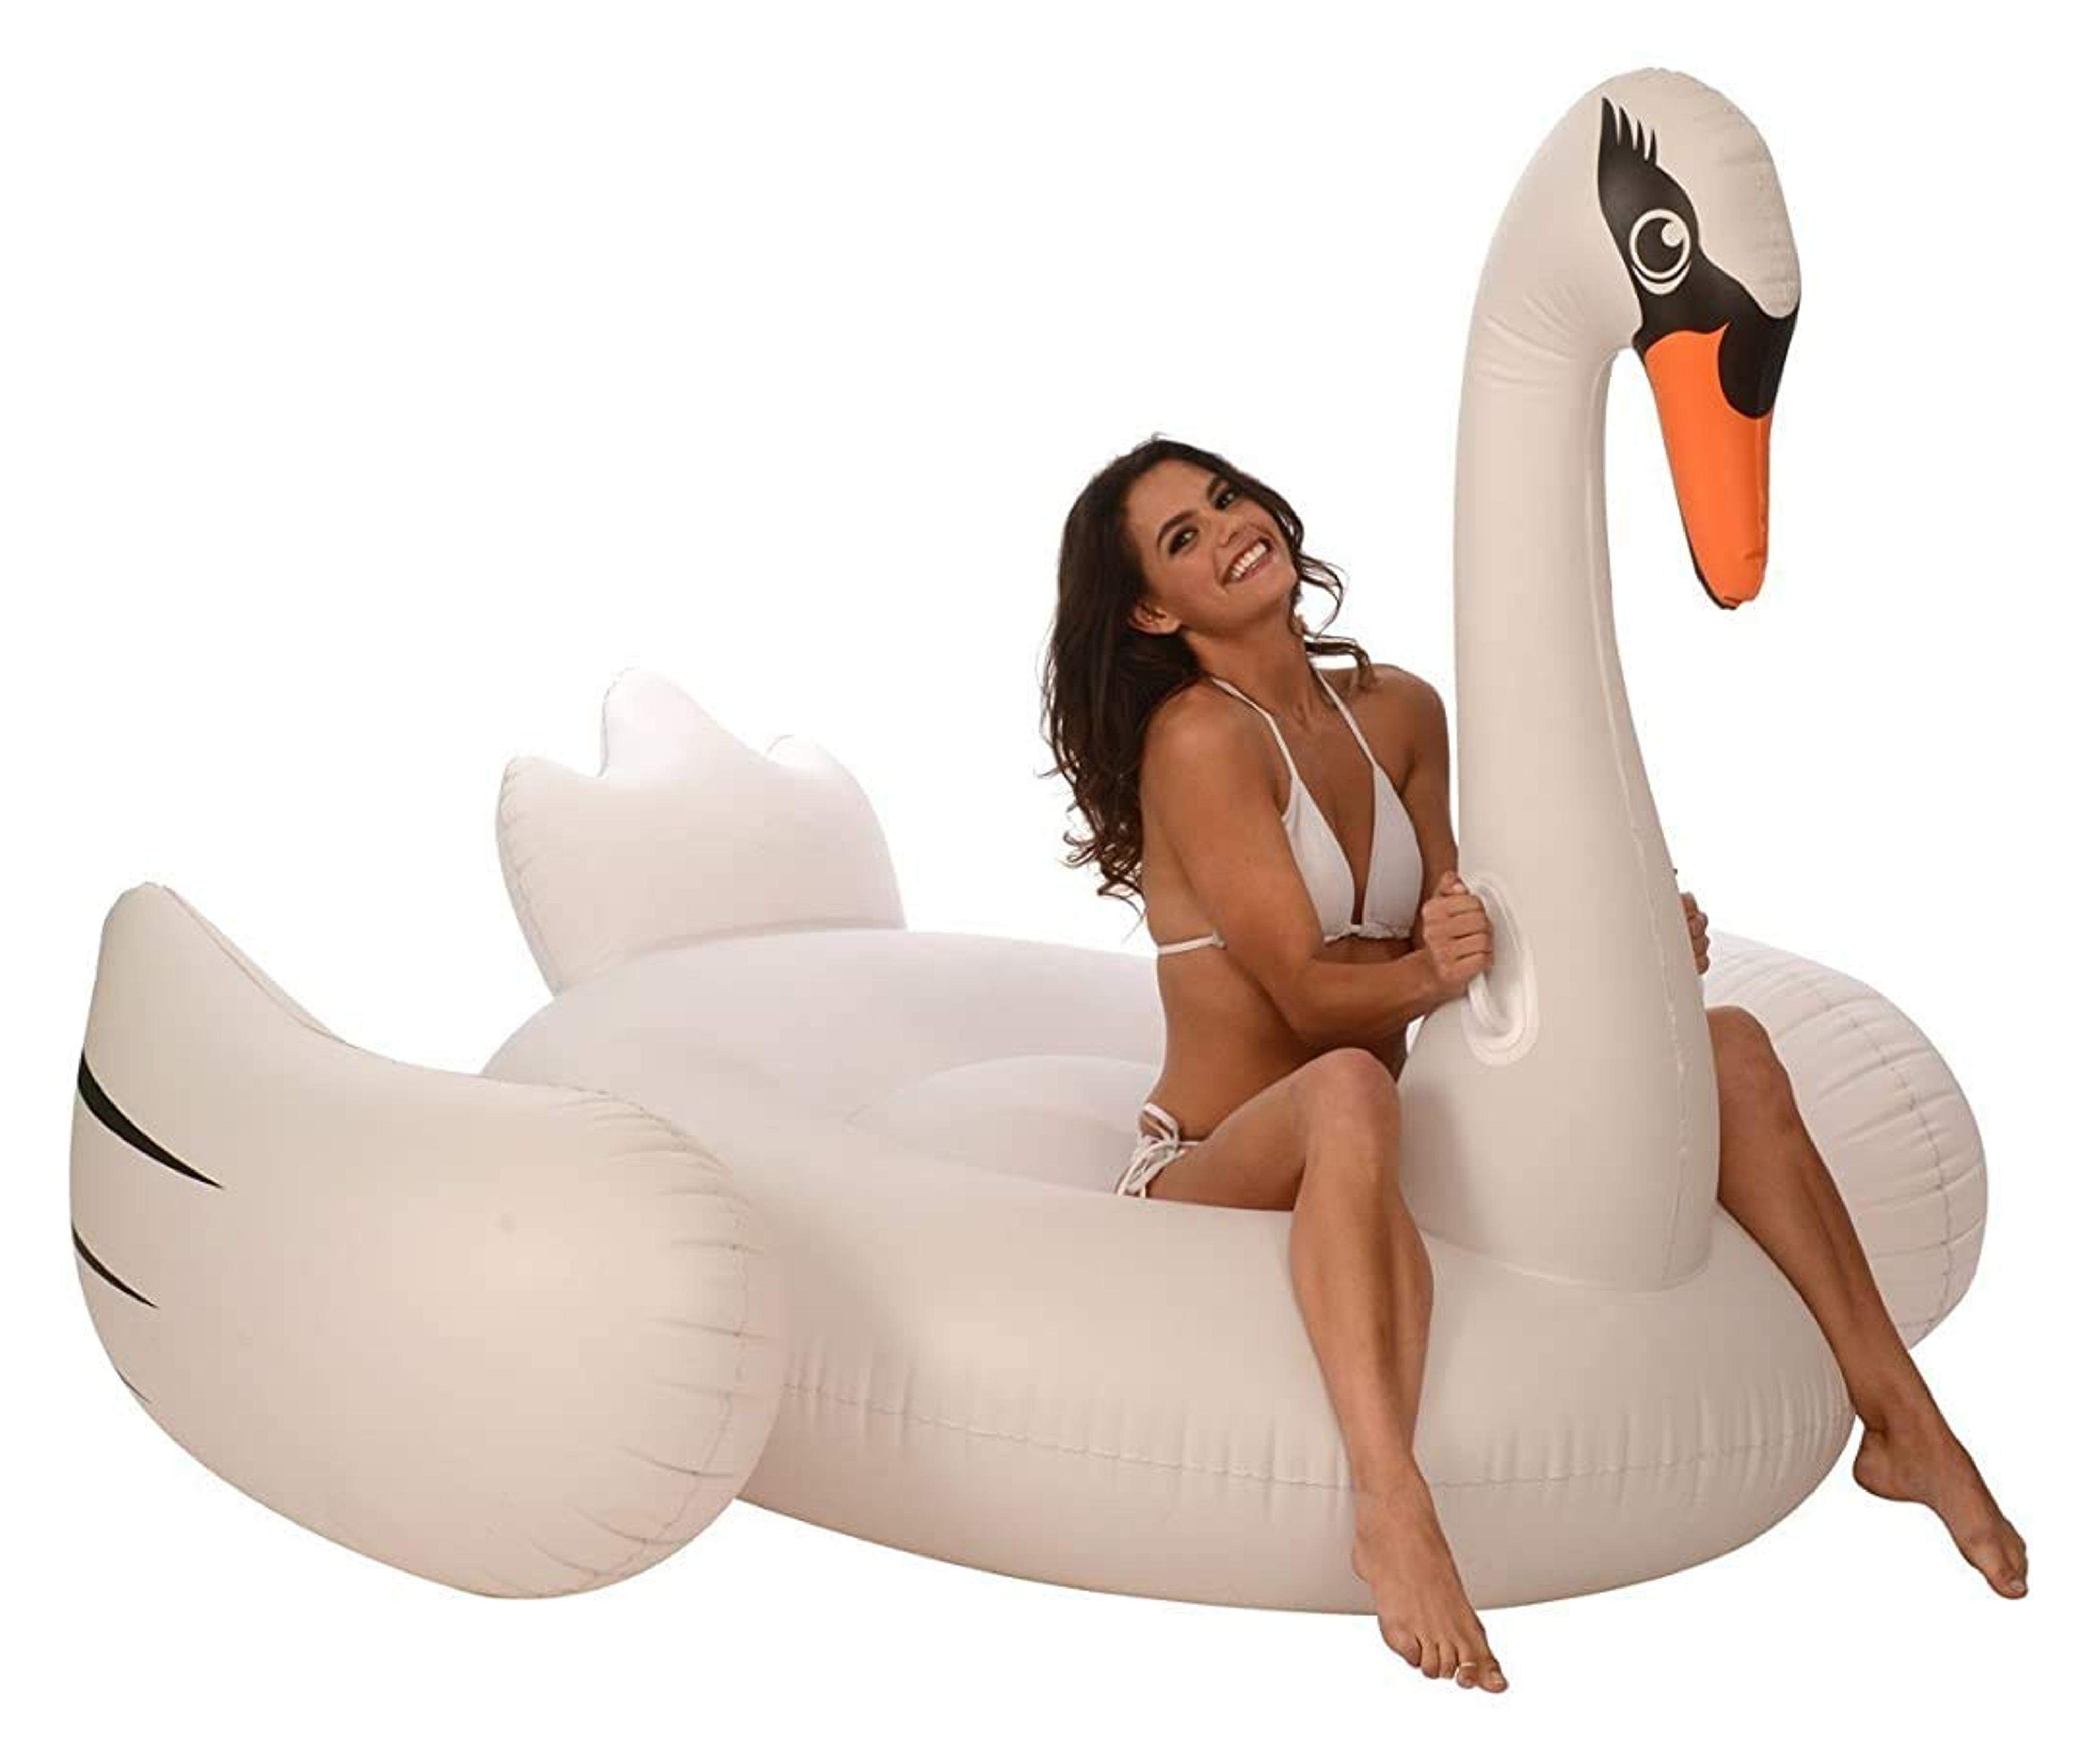 Amazon.com: One Giant Swan Inflatable Pool Float I 78 x 55 Inflatable Kiddie Pool for Kids, Adults and Toddlers I Blow Up Pool Floats for Swimming Pool Lounger I Bachelorette Pool Floats Swimming Pool Toys Rafts : Toys & Games